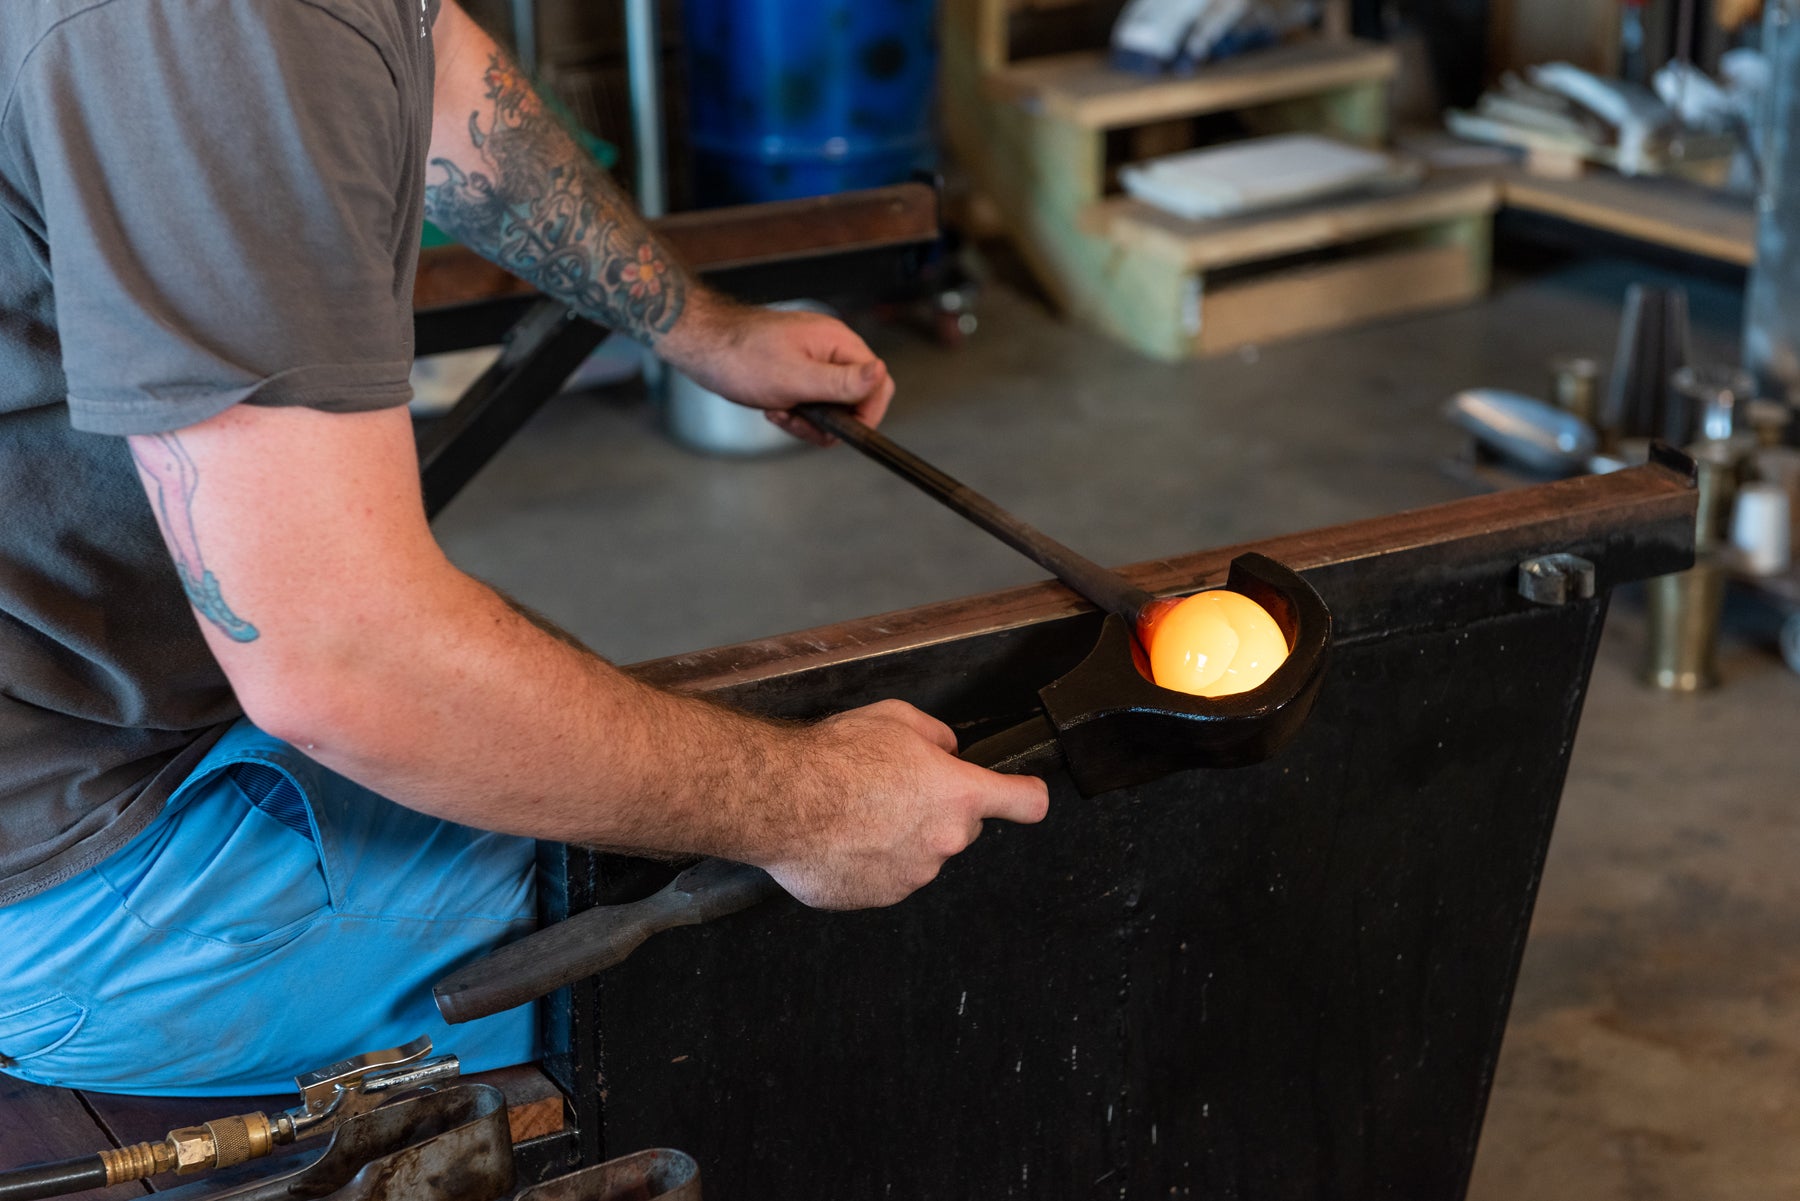 Asher Holman, owner and gaffer at small batch glass, is using a block to shape molten glass. Image by Loam